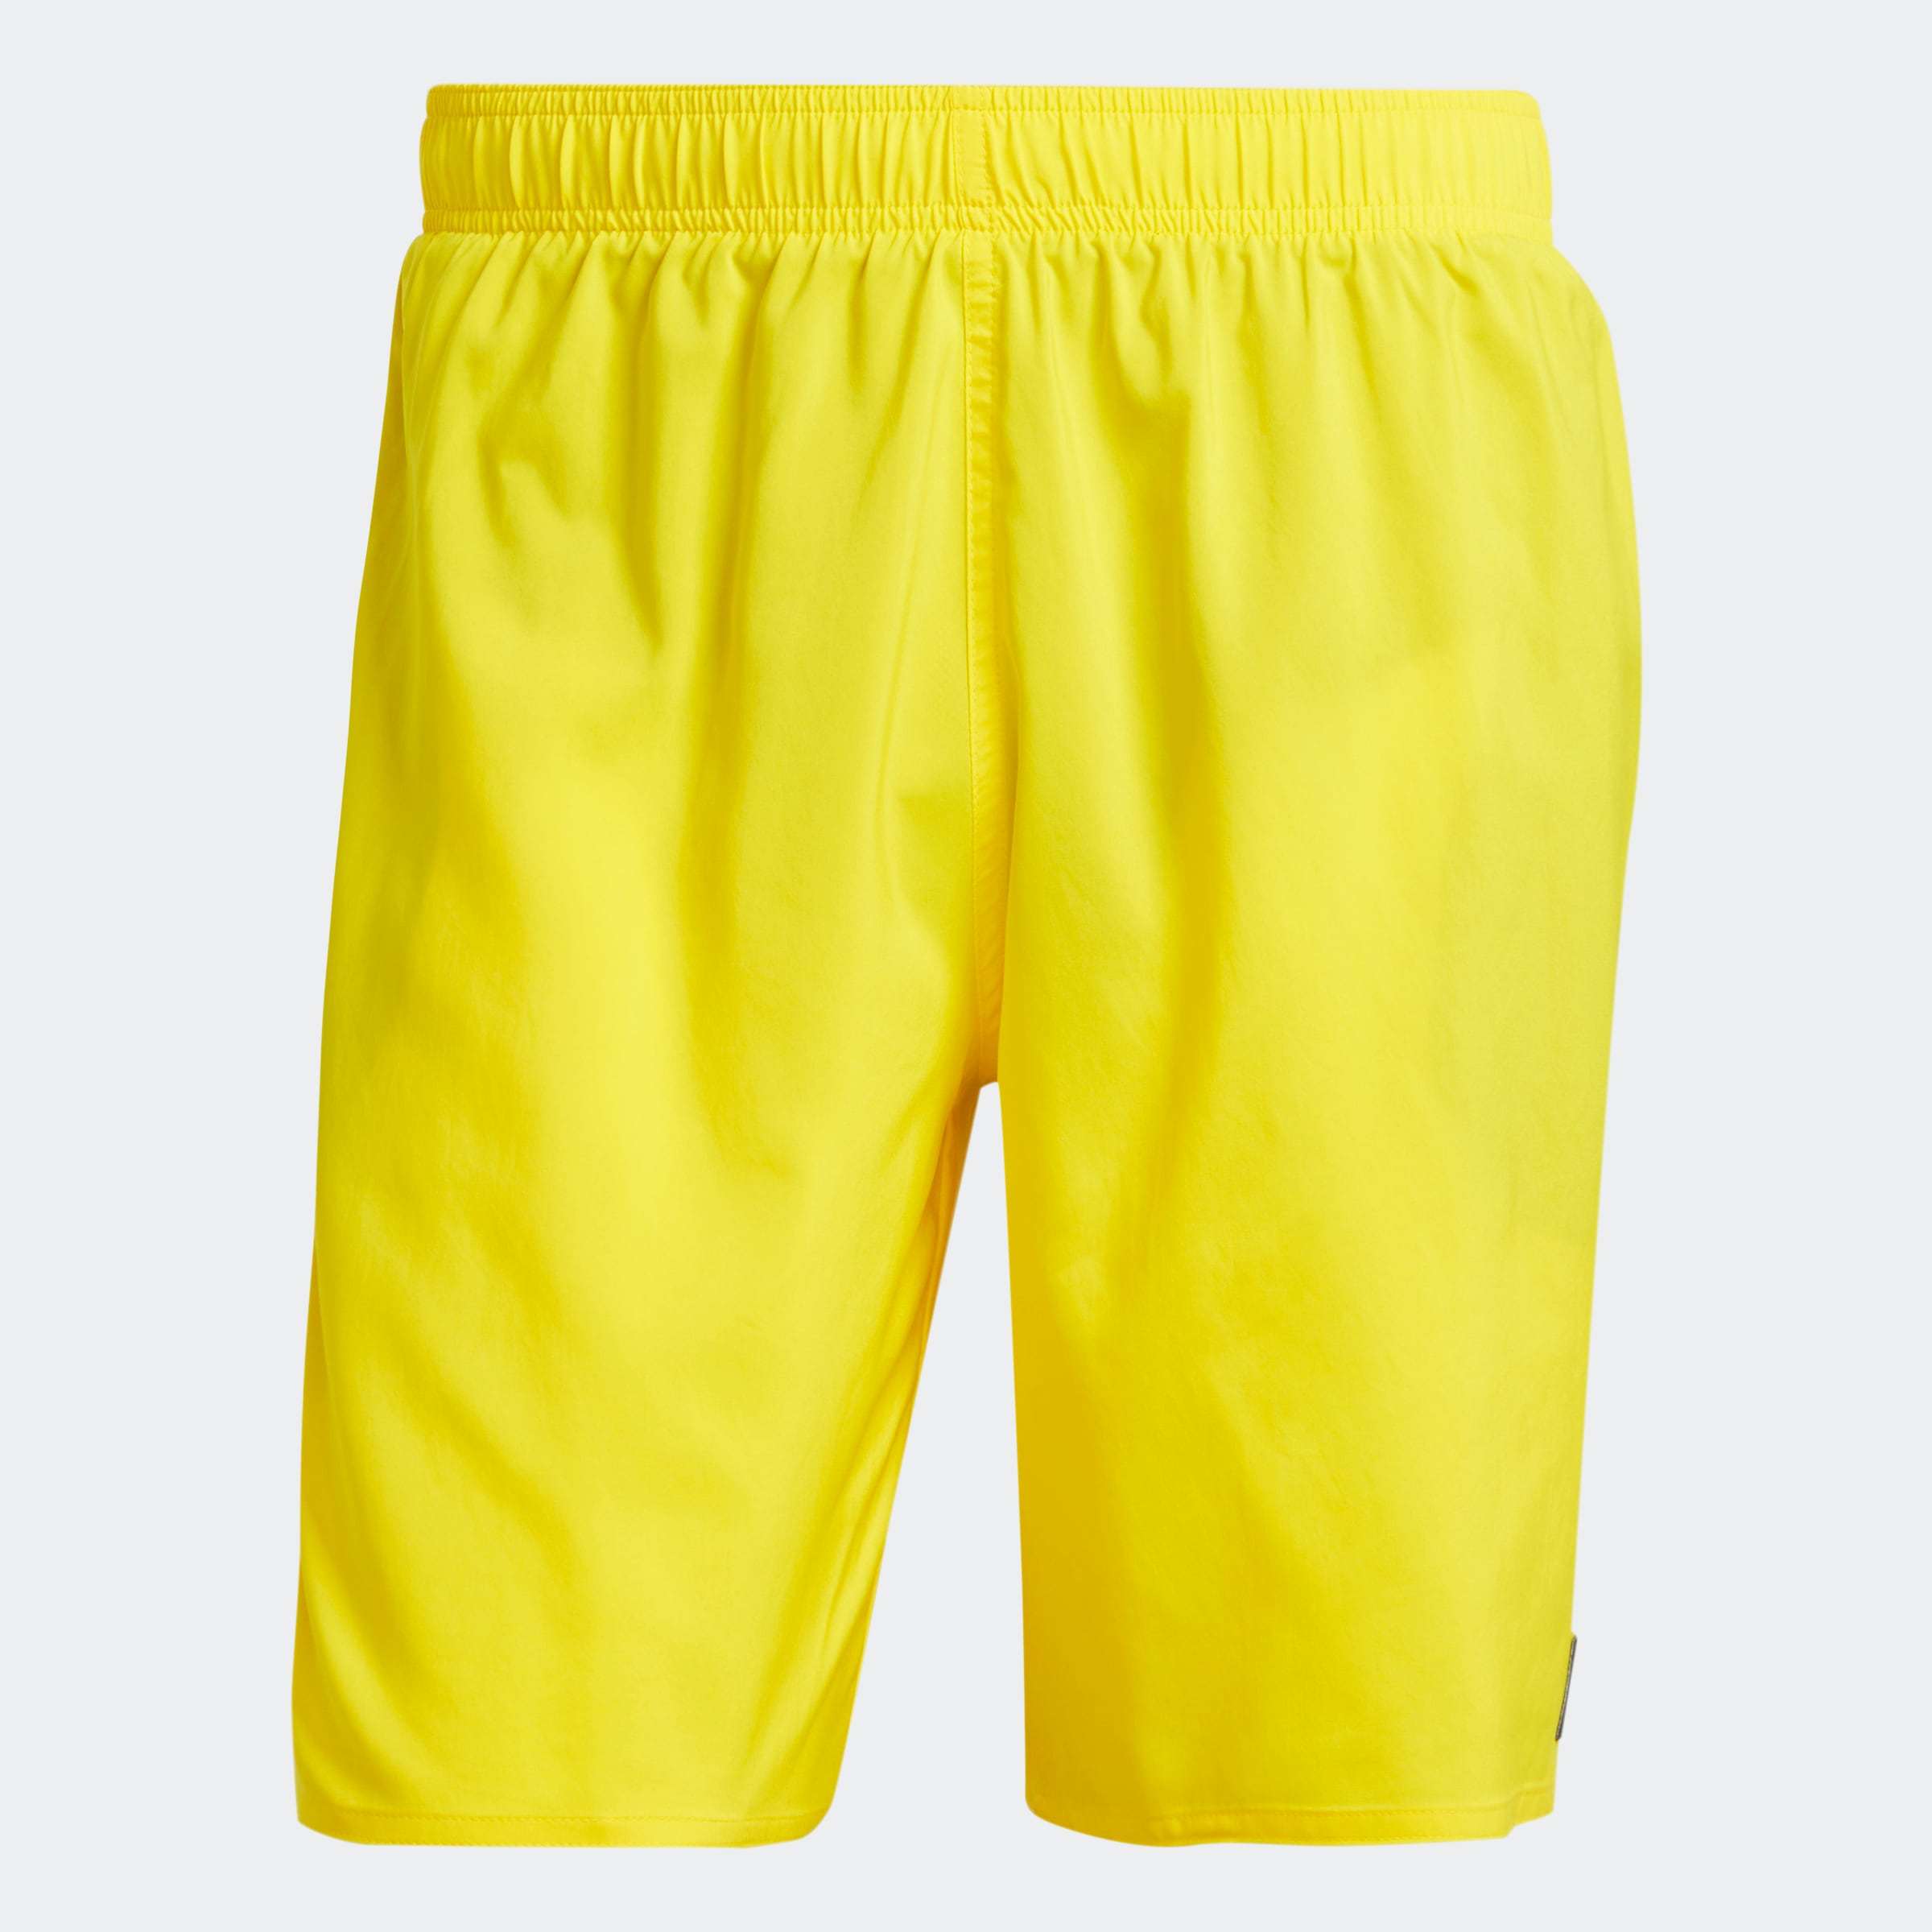 adidas Performance Badehose »SOLID CLX CLASSICLENGTH«, (1 St.)